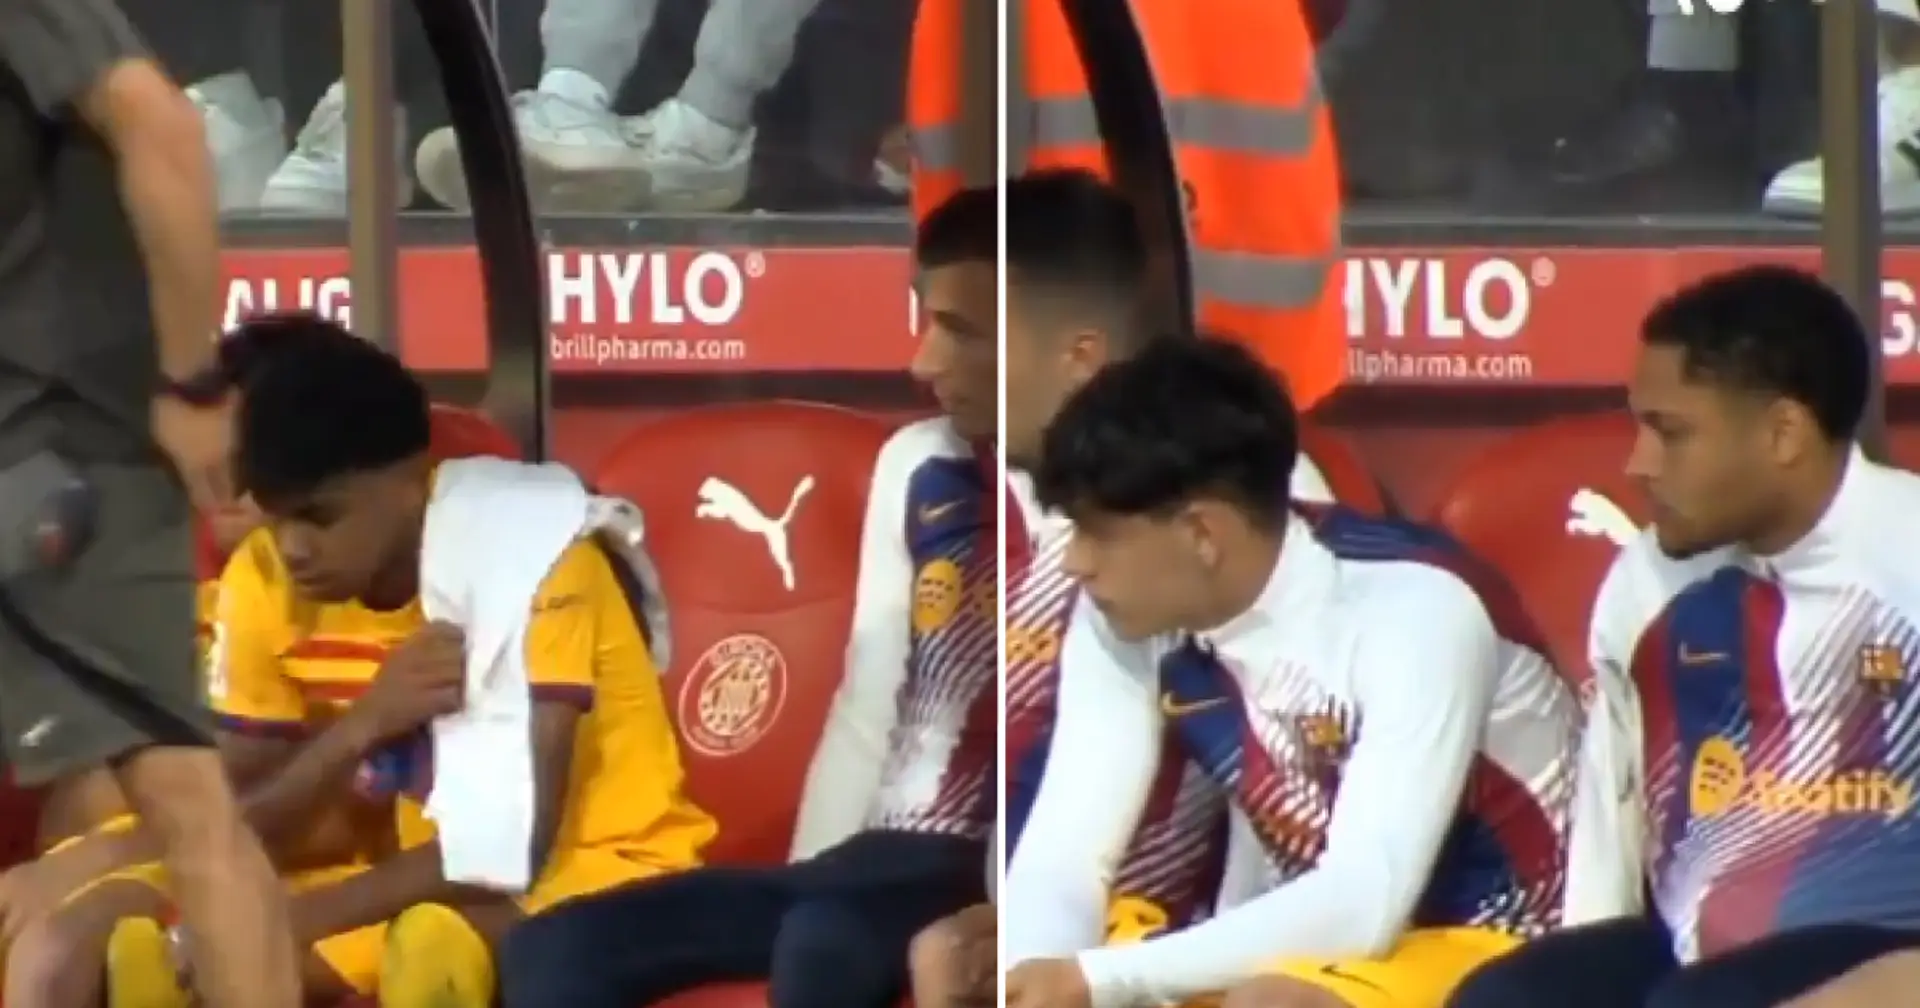 Caught on camera: Lamine Yamal shows anger at Girona, flings sweatshirt – Roque and others in shock